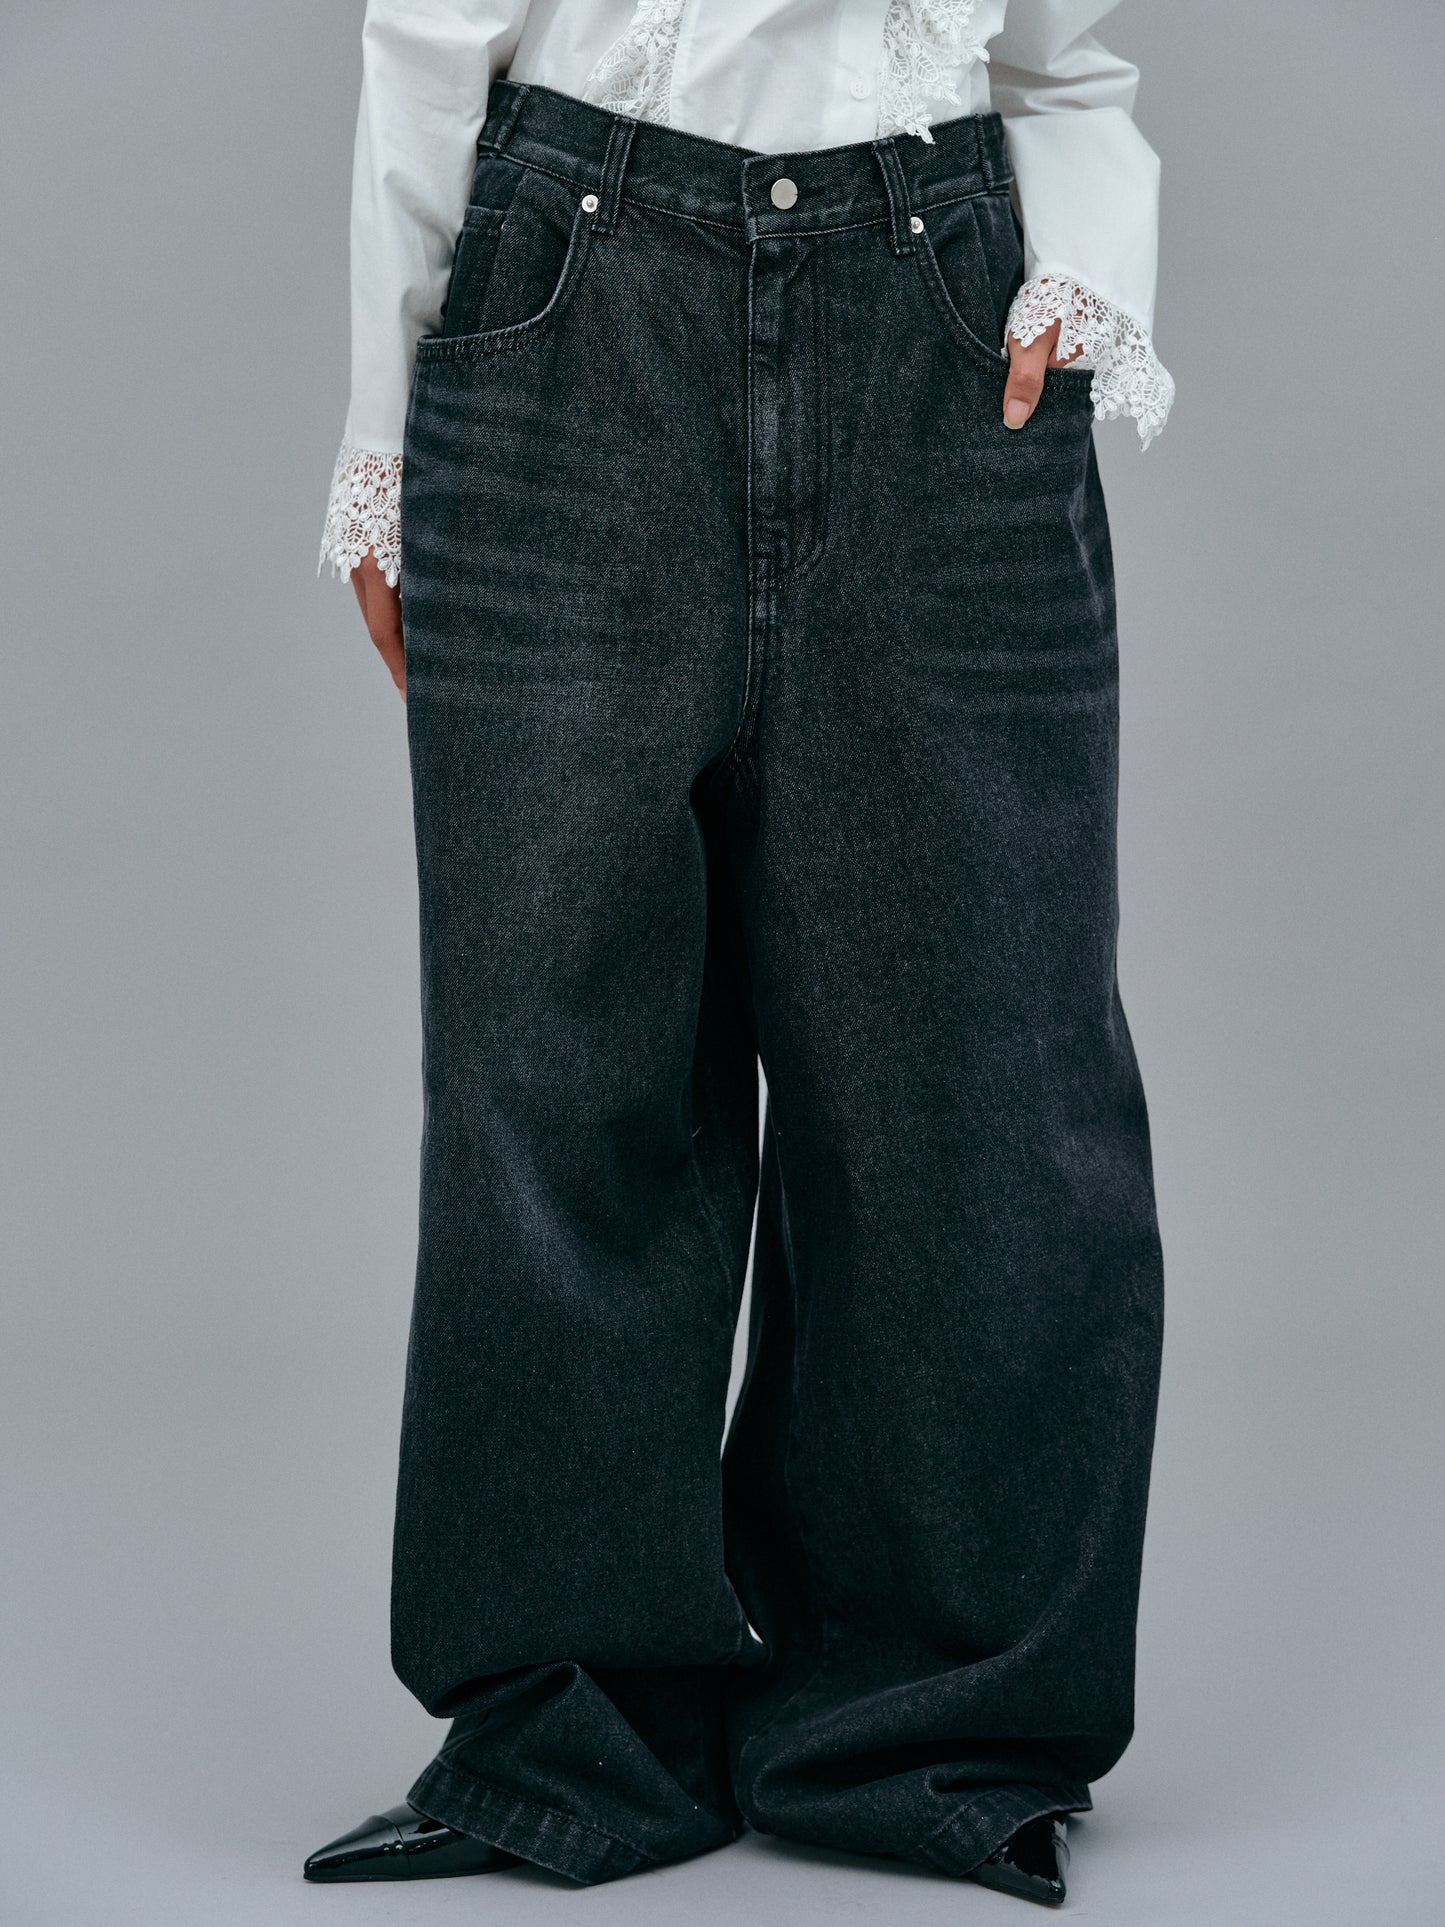 SourceUnknown Exaggerated – Jeans, Black Wide-Leg